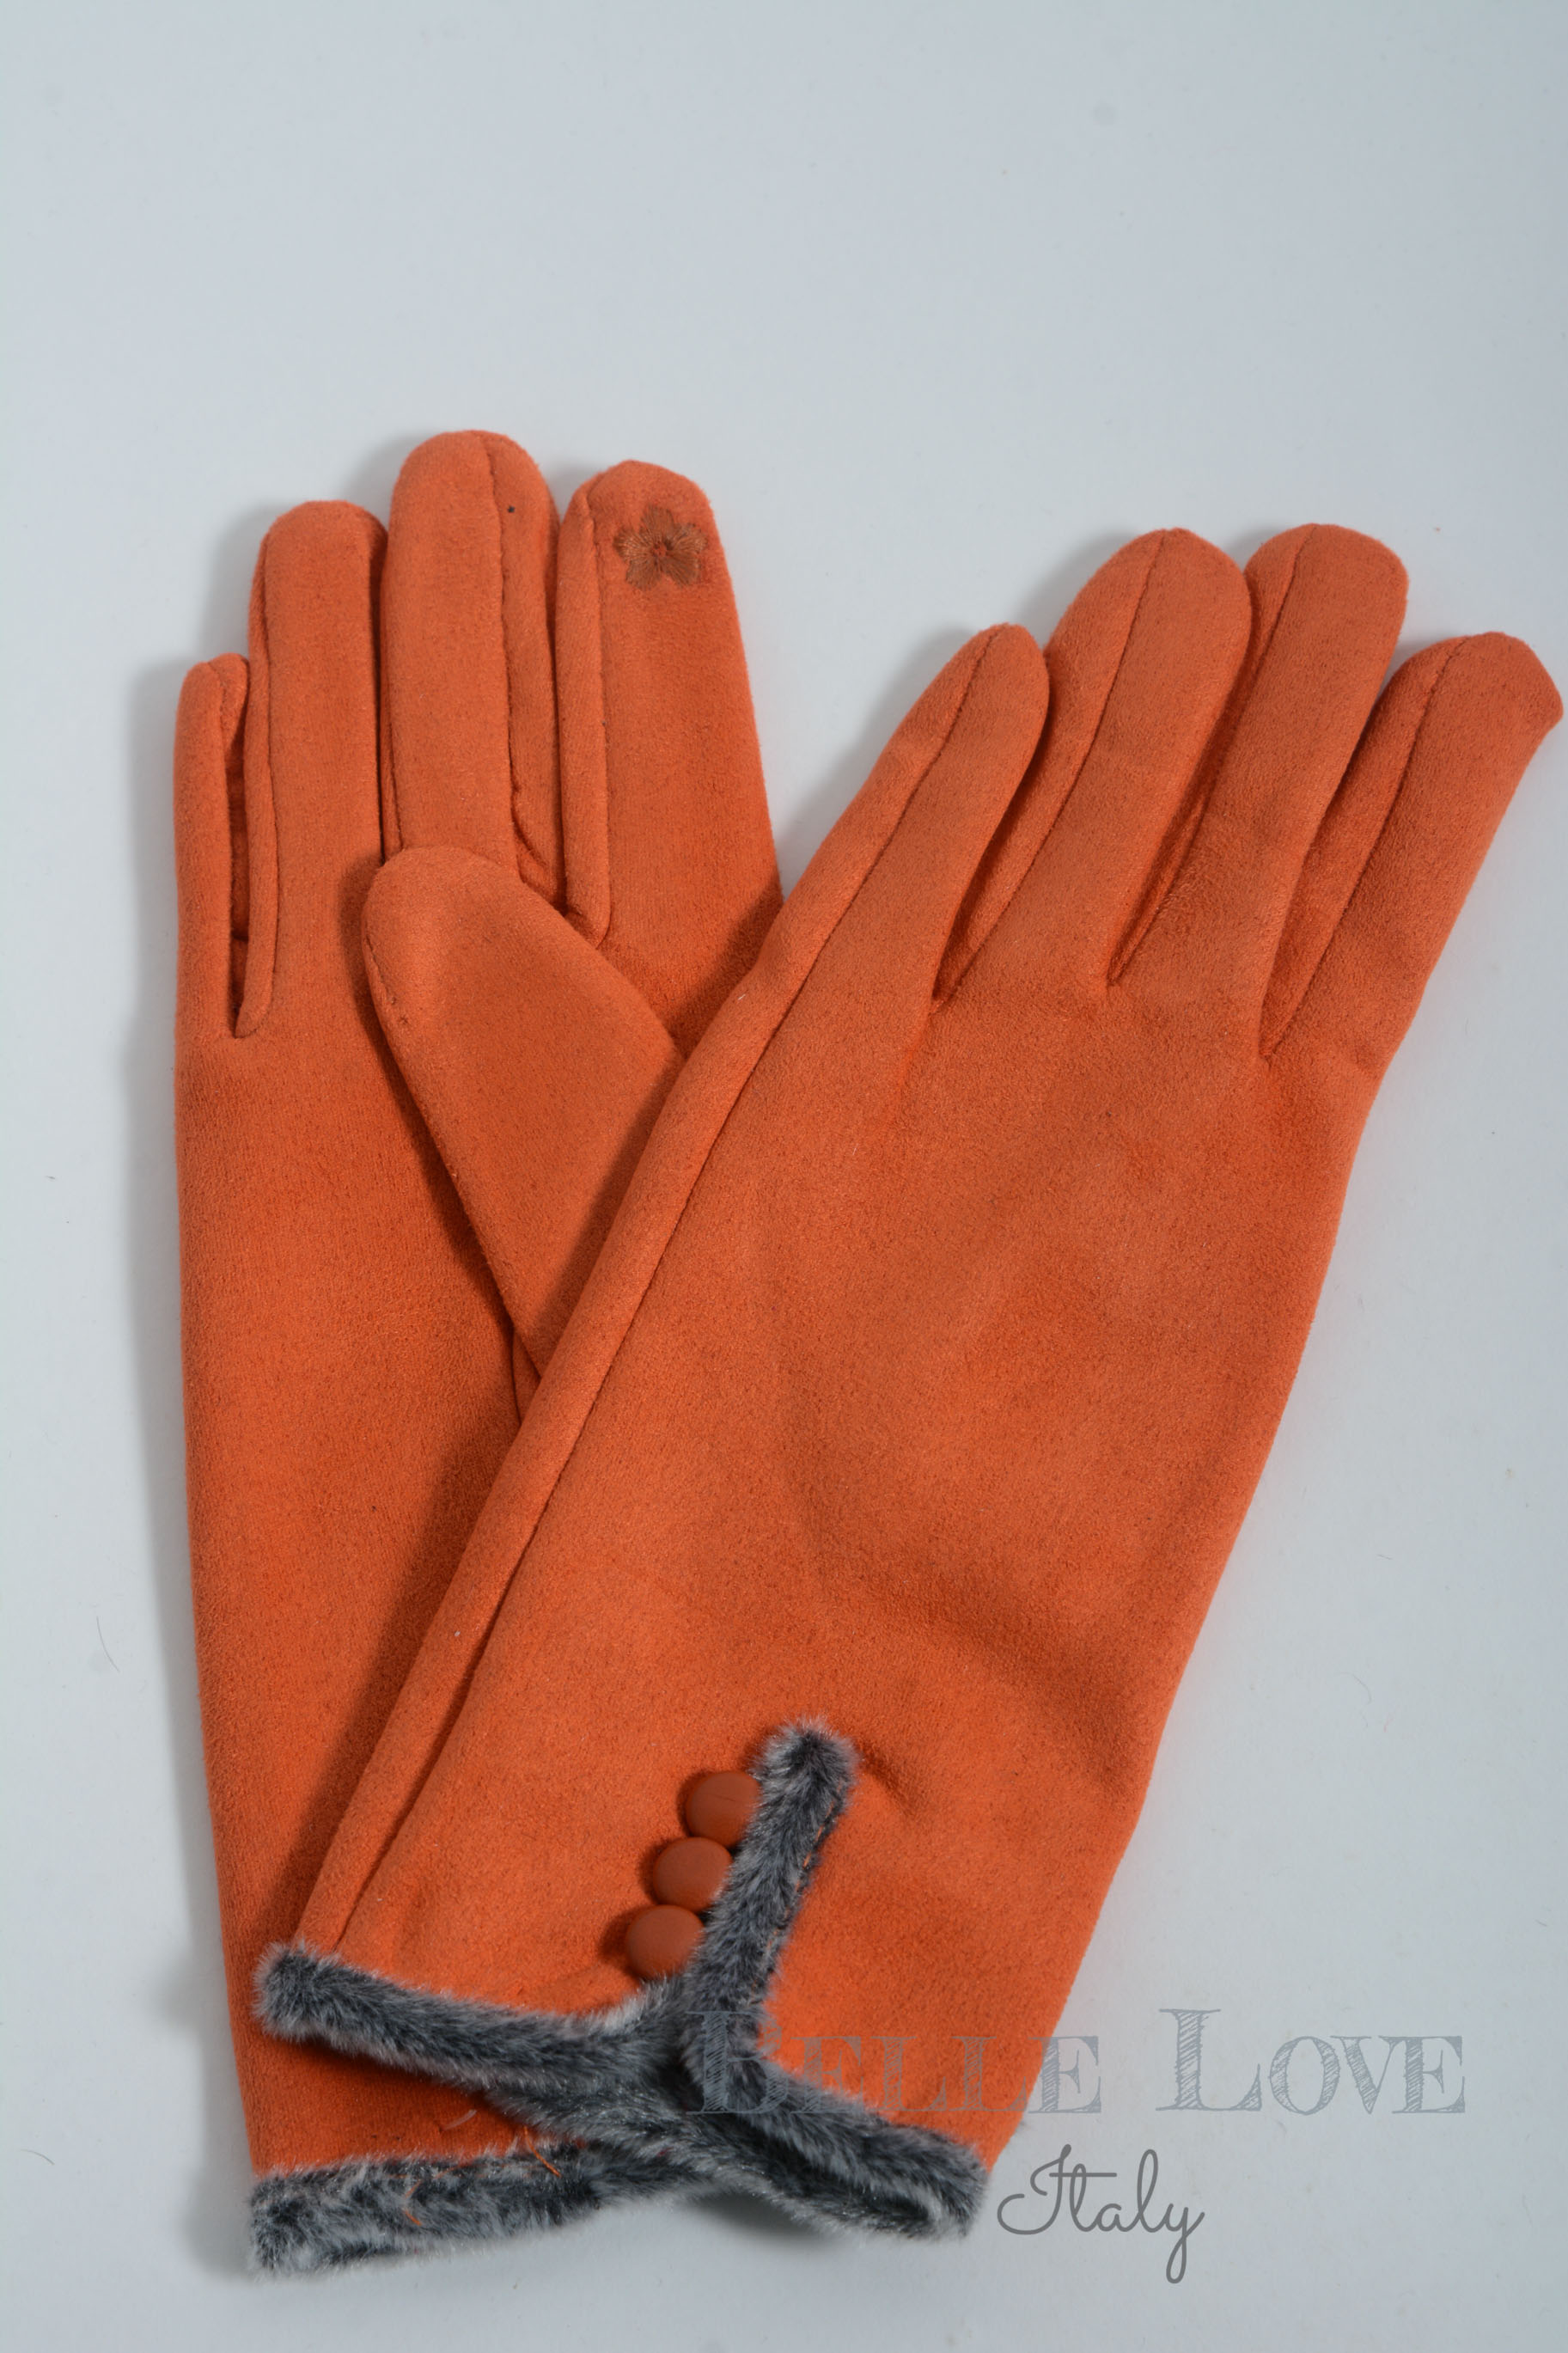 Belle Love Italy Ellie Faux Suede Button Gloves